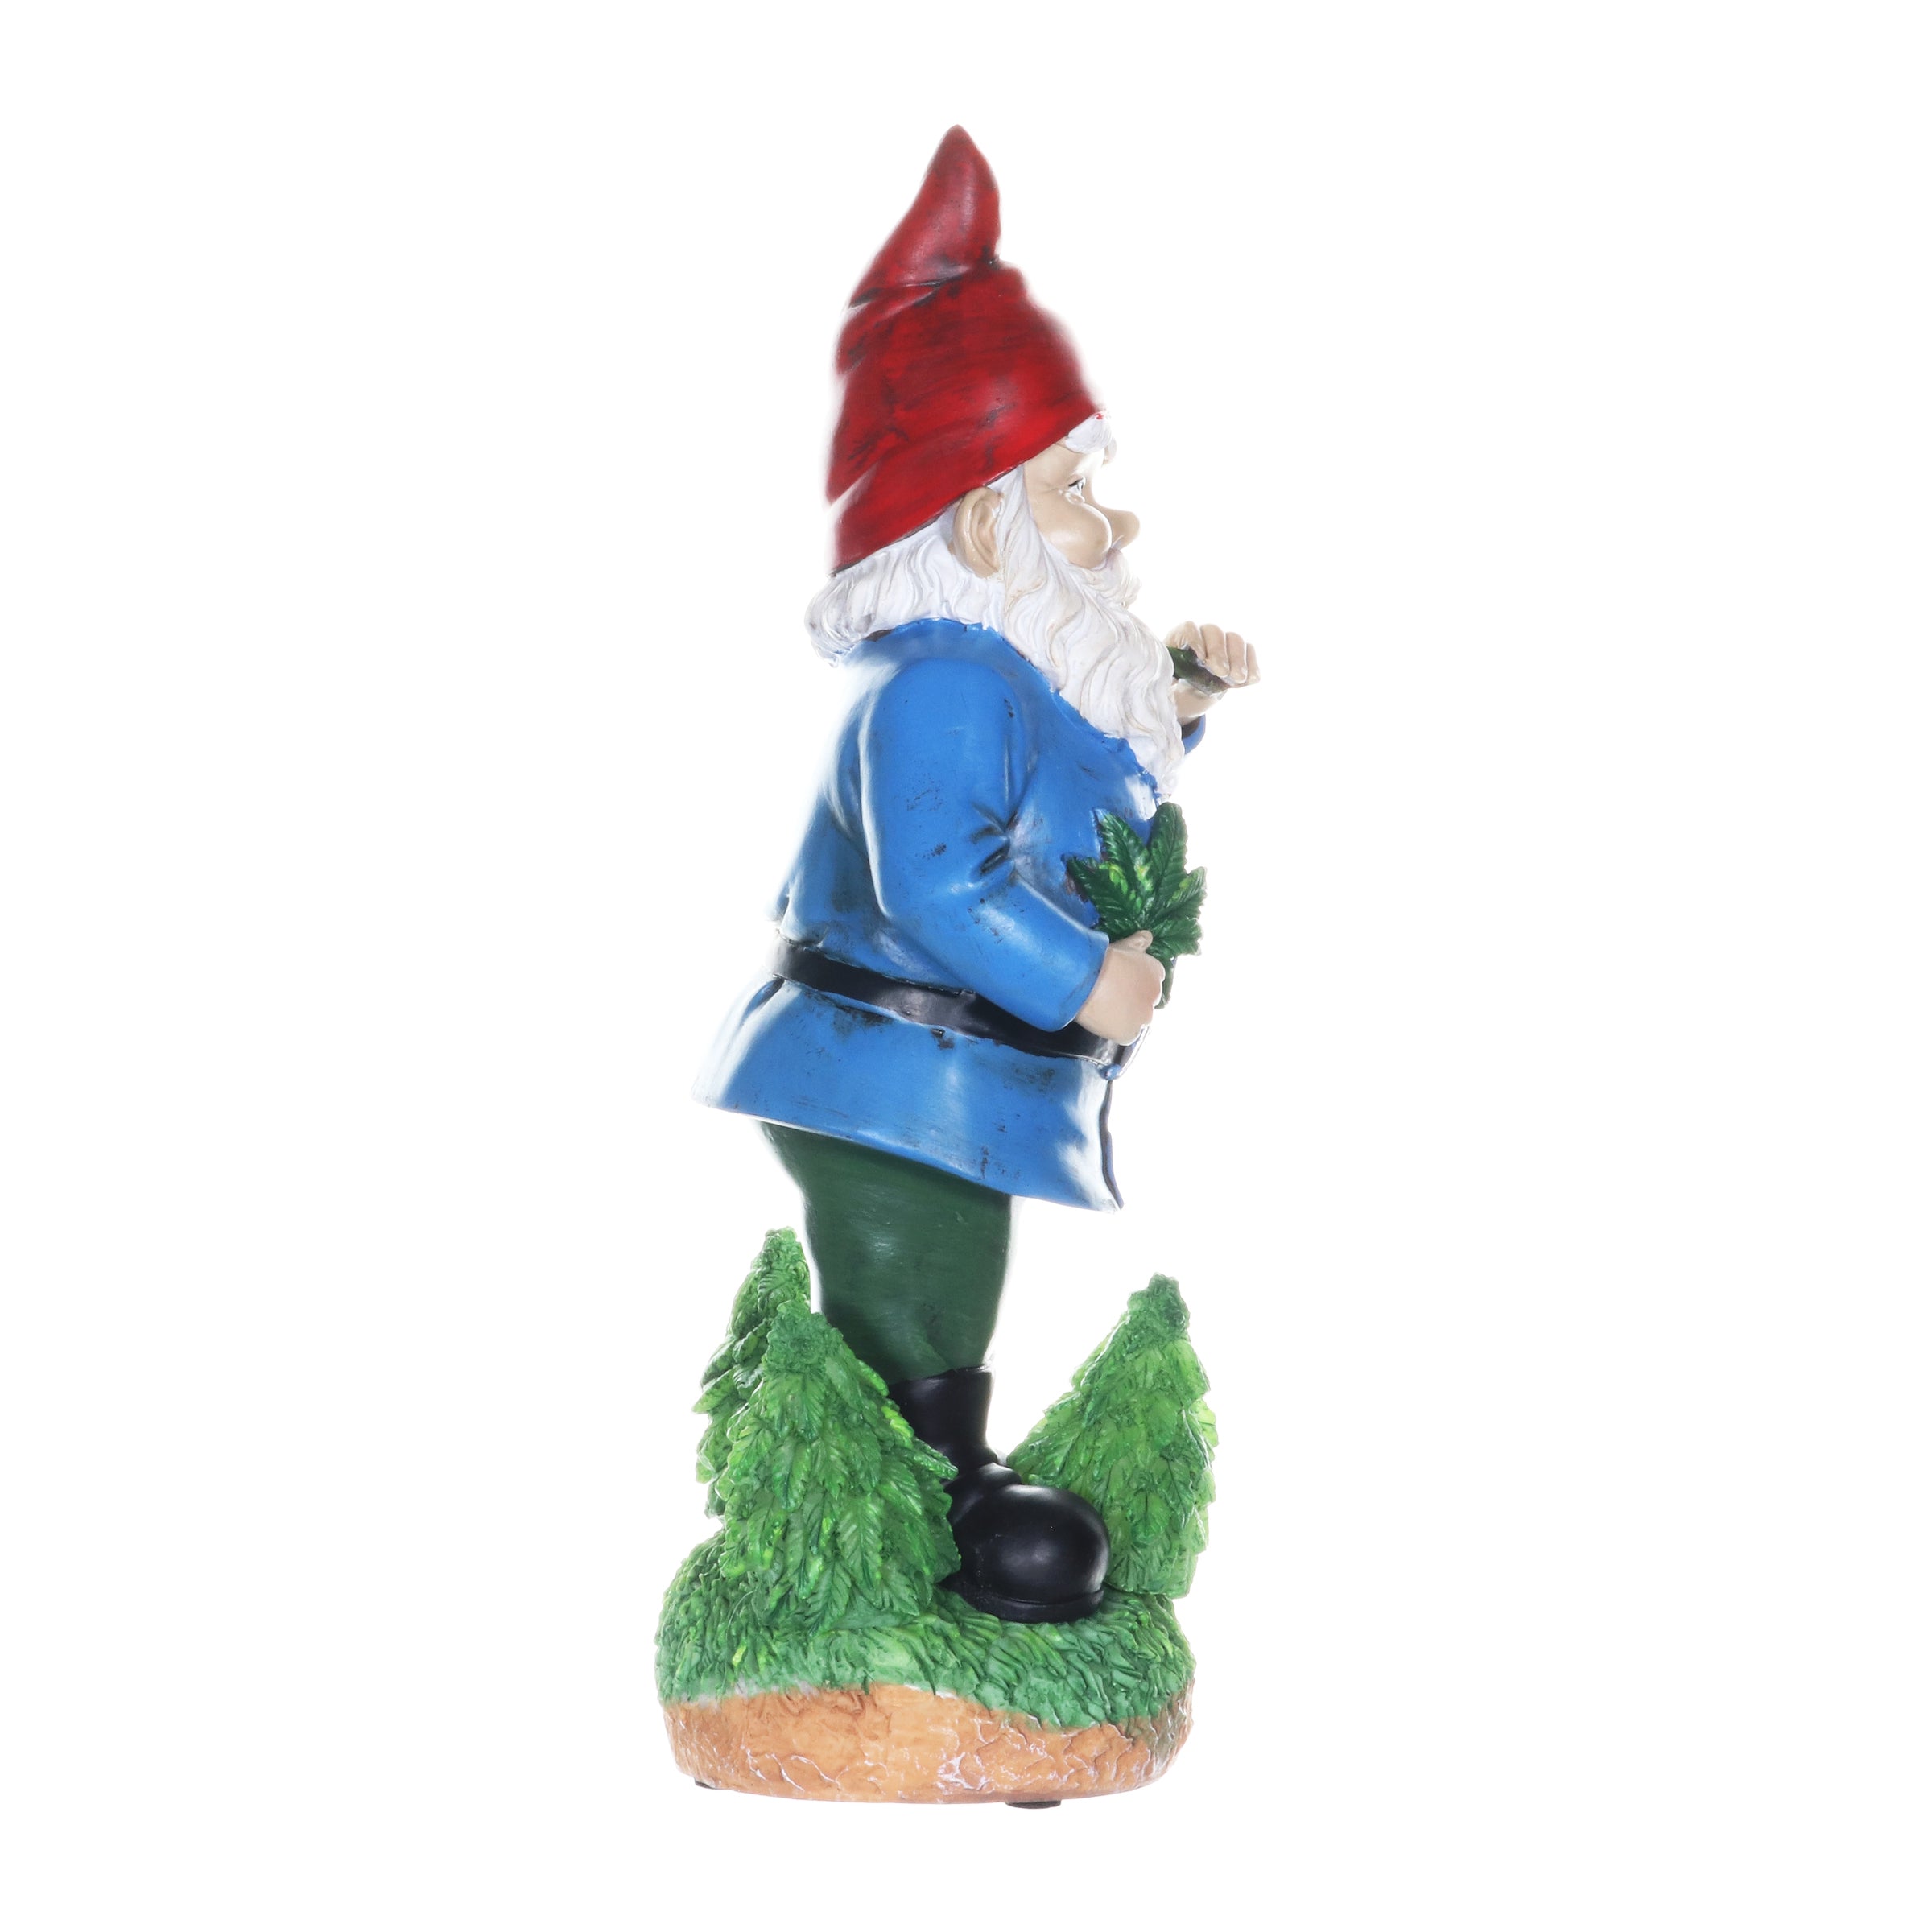 Good Time Nugg Gnome Statue Smoking Marijuana with Light Up LEDs on a Battery Timer, Indoor or Outdoor, 12 Inches Tall | Exhart